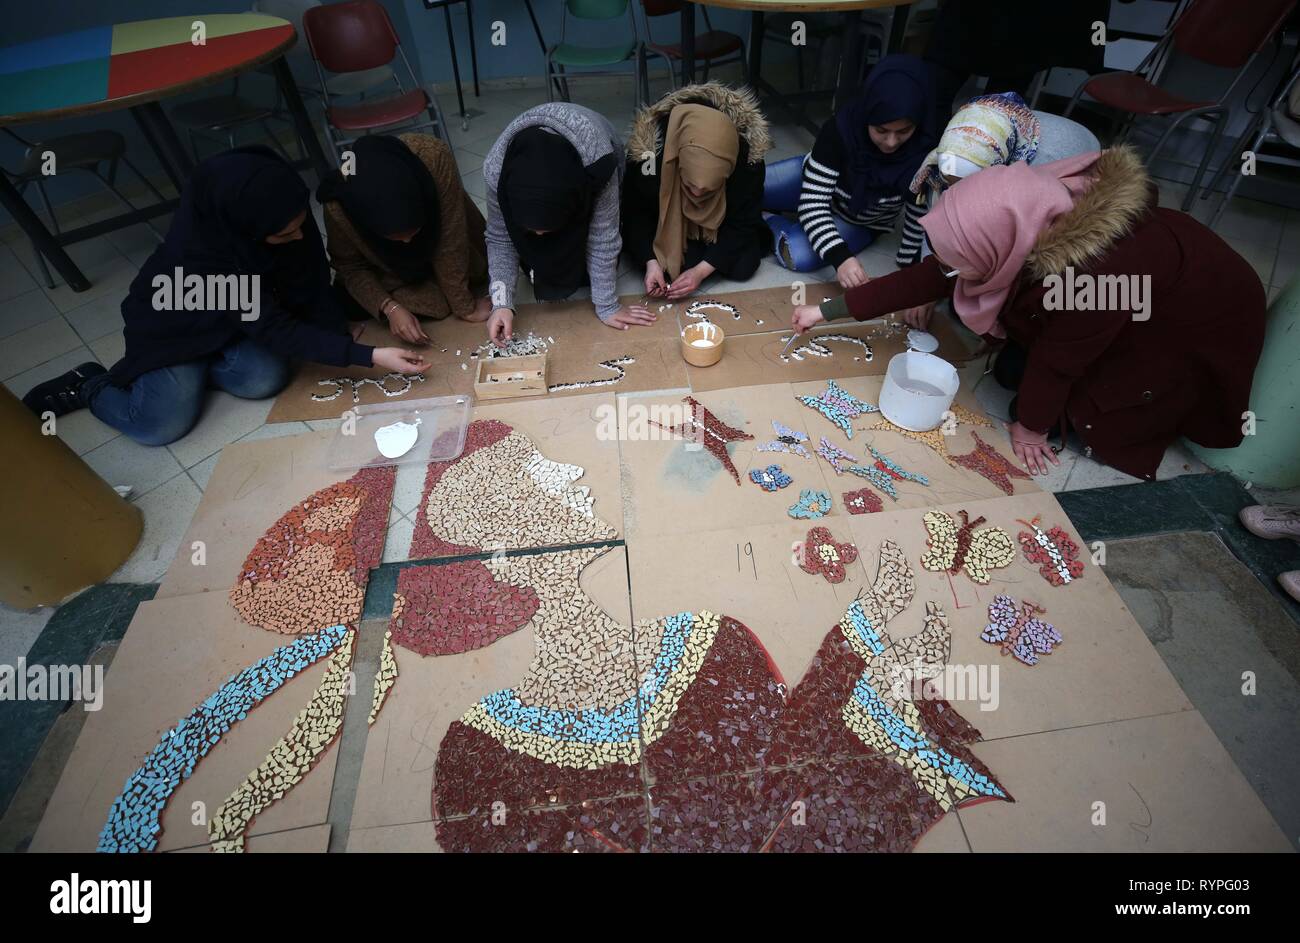 190314) -- NABLUS, March 14, 2019 (Xinhua) -- Young Palestinian girls work  in making a mural titled "The Lady of Spring" at the Nablus Girls  Rehabilitation Center in the West Bank city